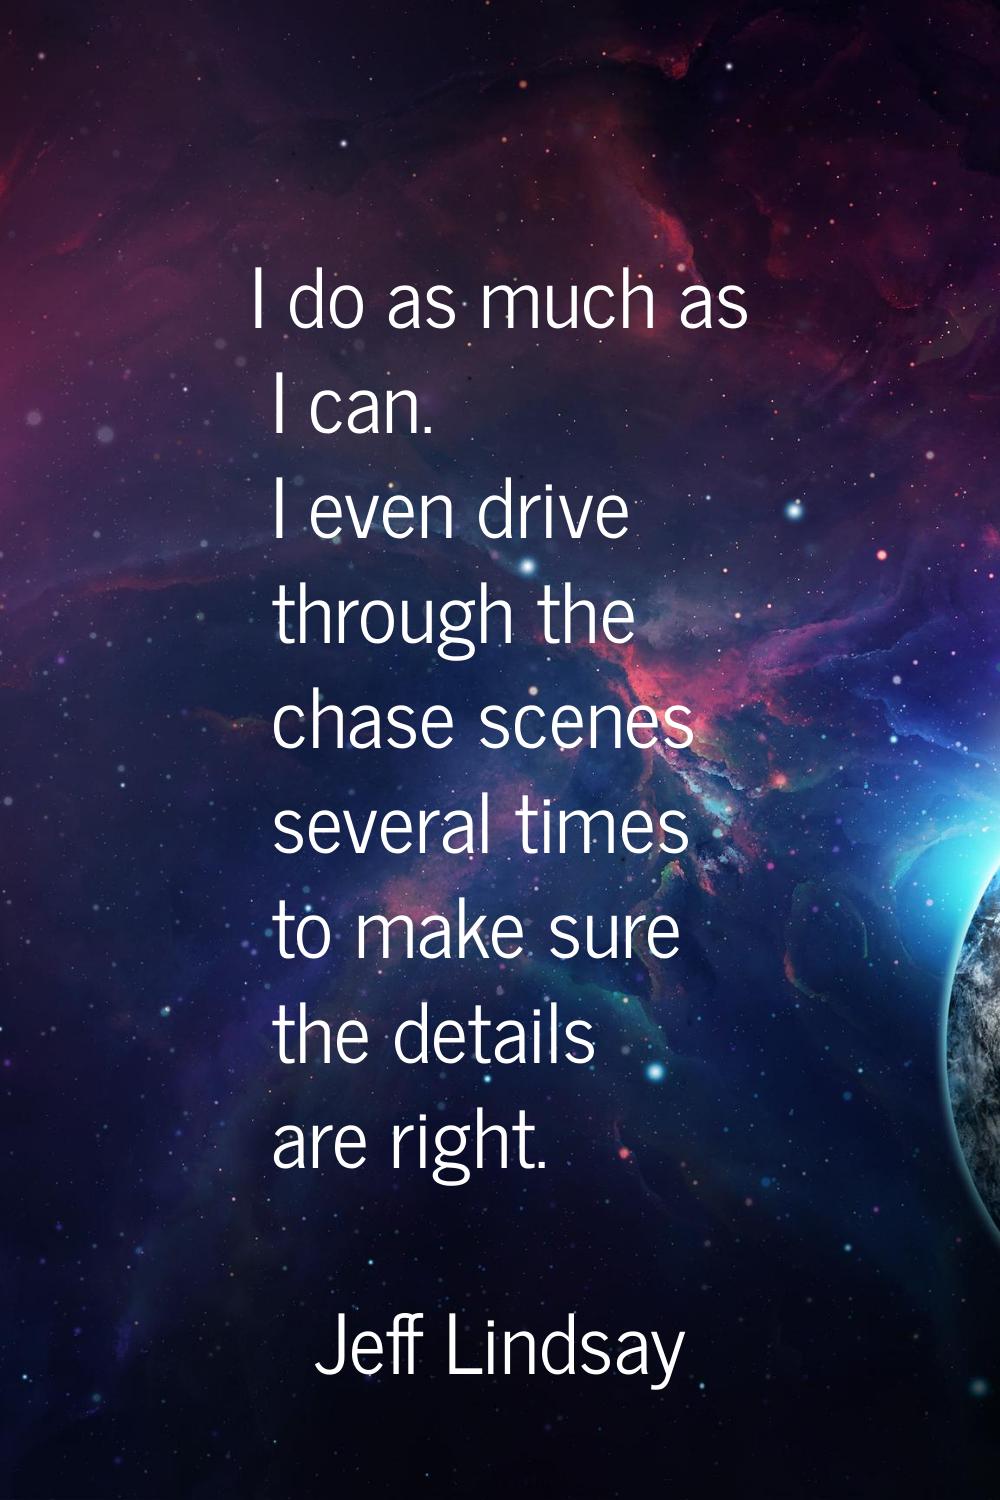 I do as much as I can. I even drive through the chase scenes several times to make sure the details